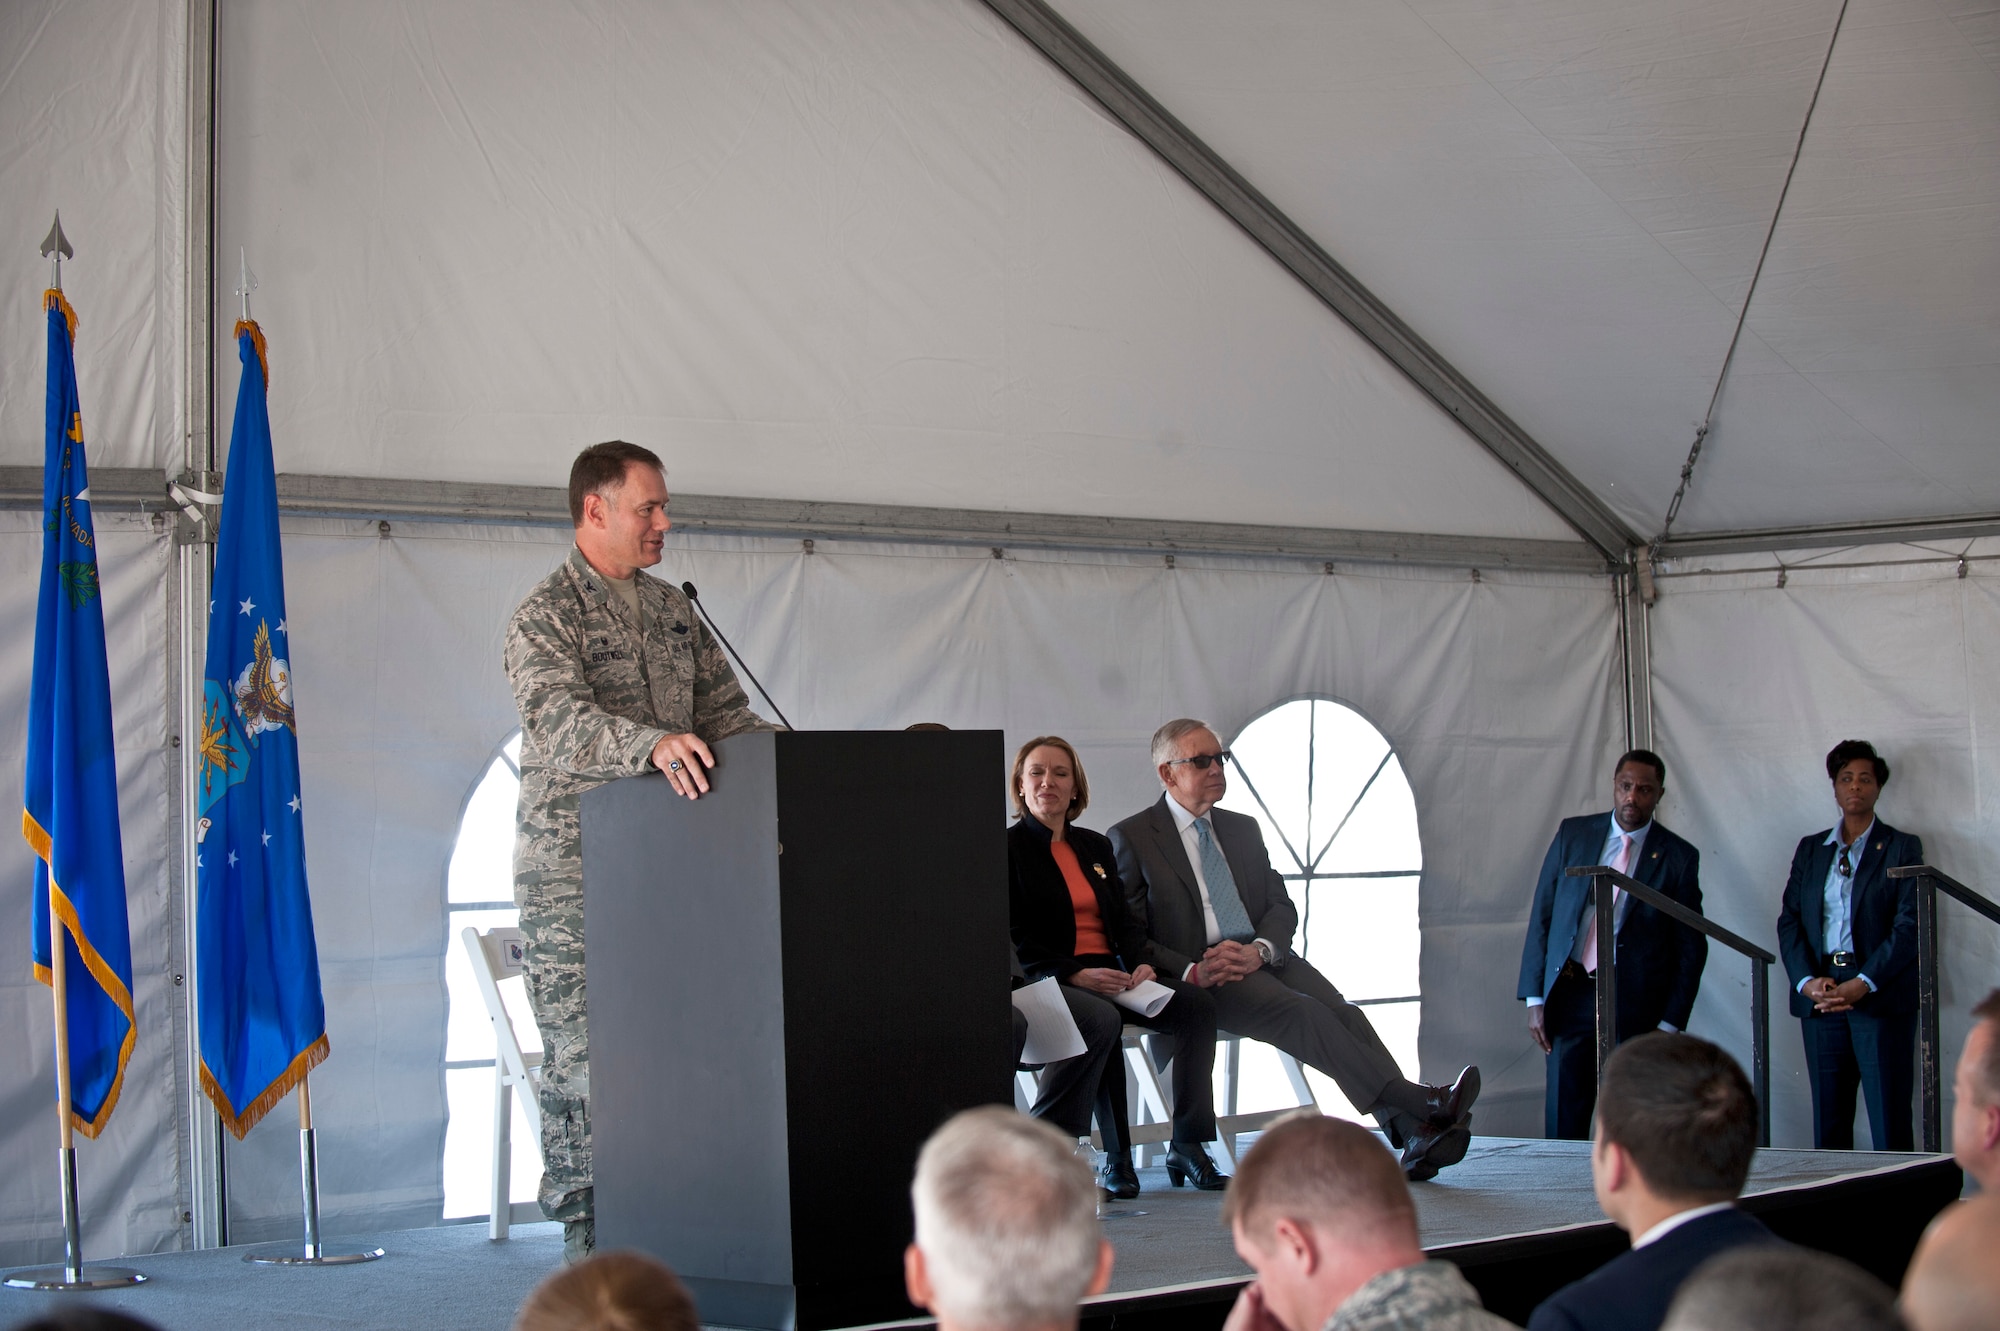 Col. Richard Boutwell, 99th Air Base Wing commander, addresses attendees at the Nellis Solar Array II dedication ceremony Feb. 16, 2016, at Nellis Air Force Base, Nev. The energy generated between the two Nellis AFB solar arrays is approximately 42 percent of the kilowatts per hour needed to power the installation.   (U.S. Air Force photo by Senior Airman Joshua Kleinholz)